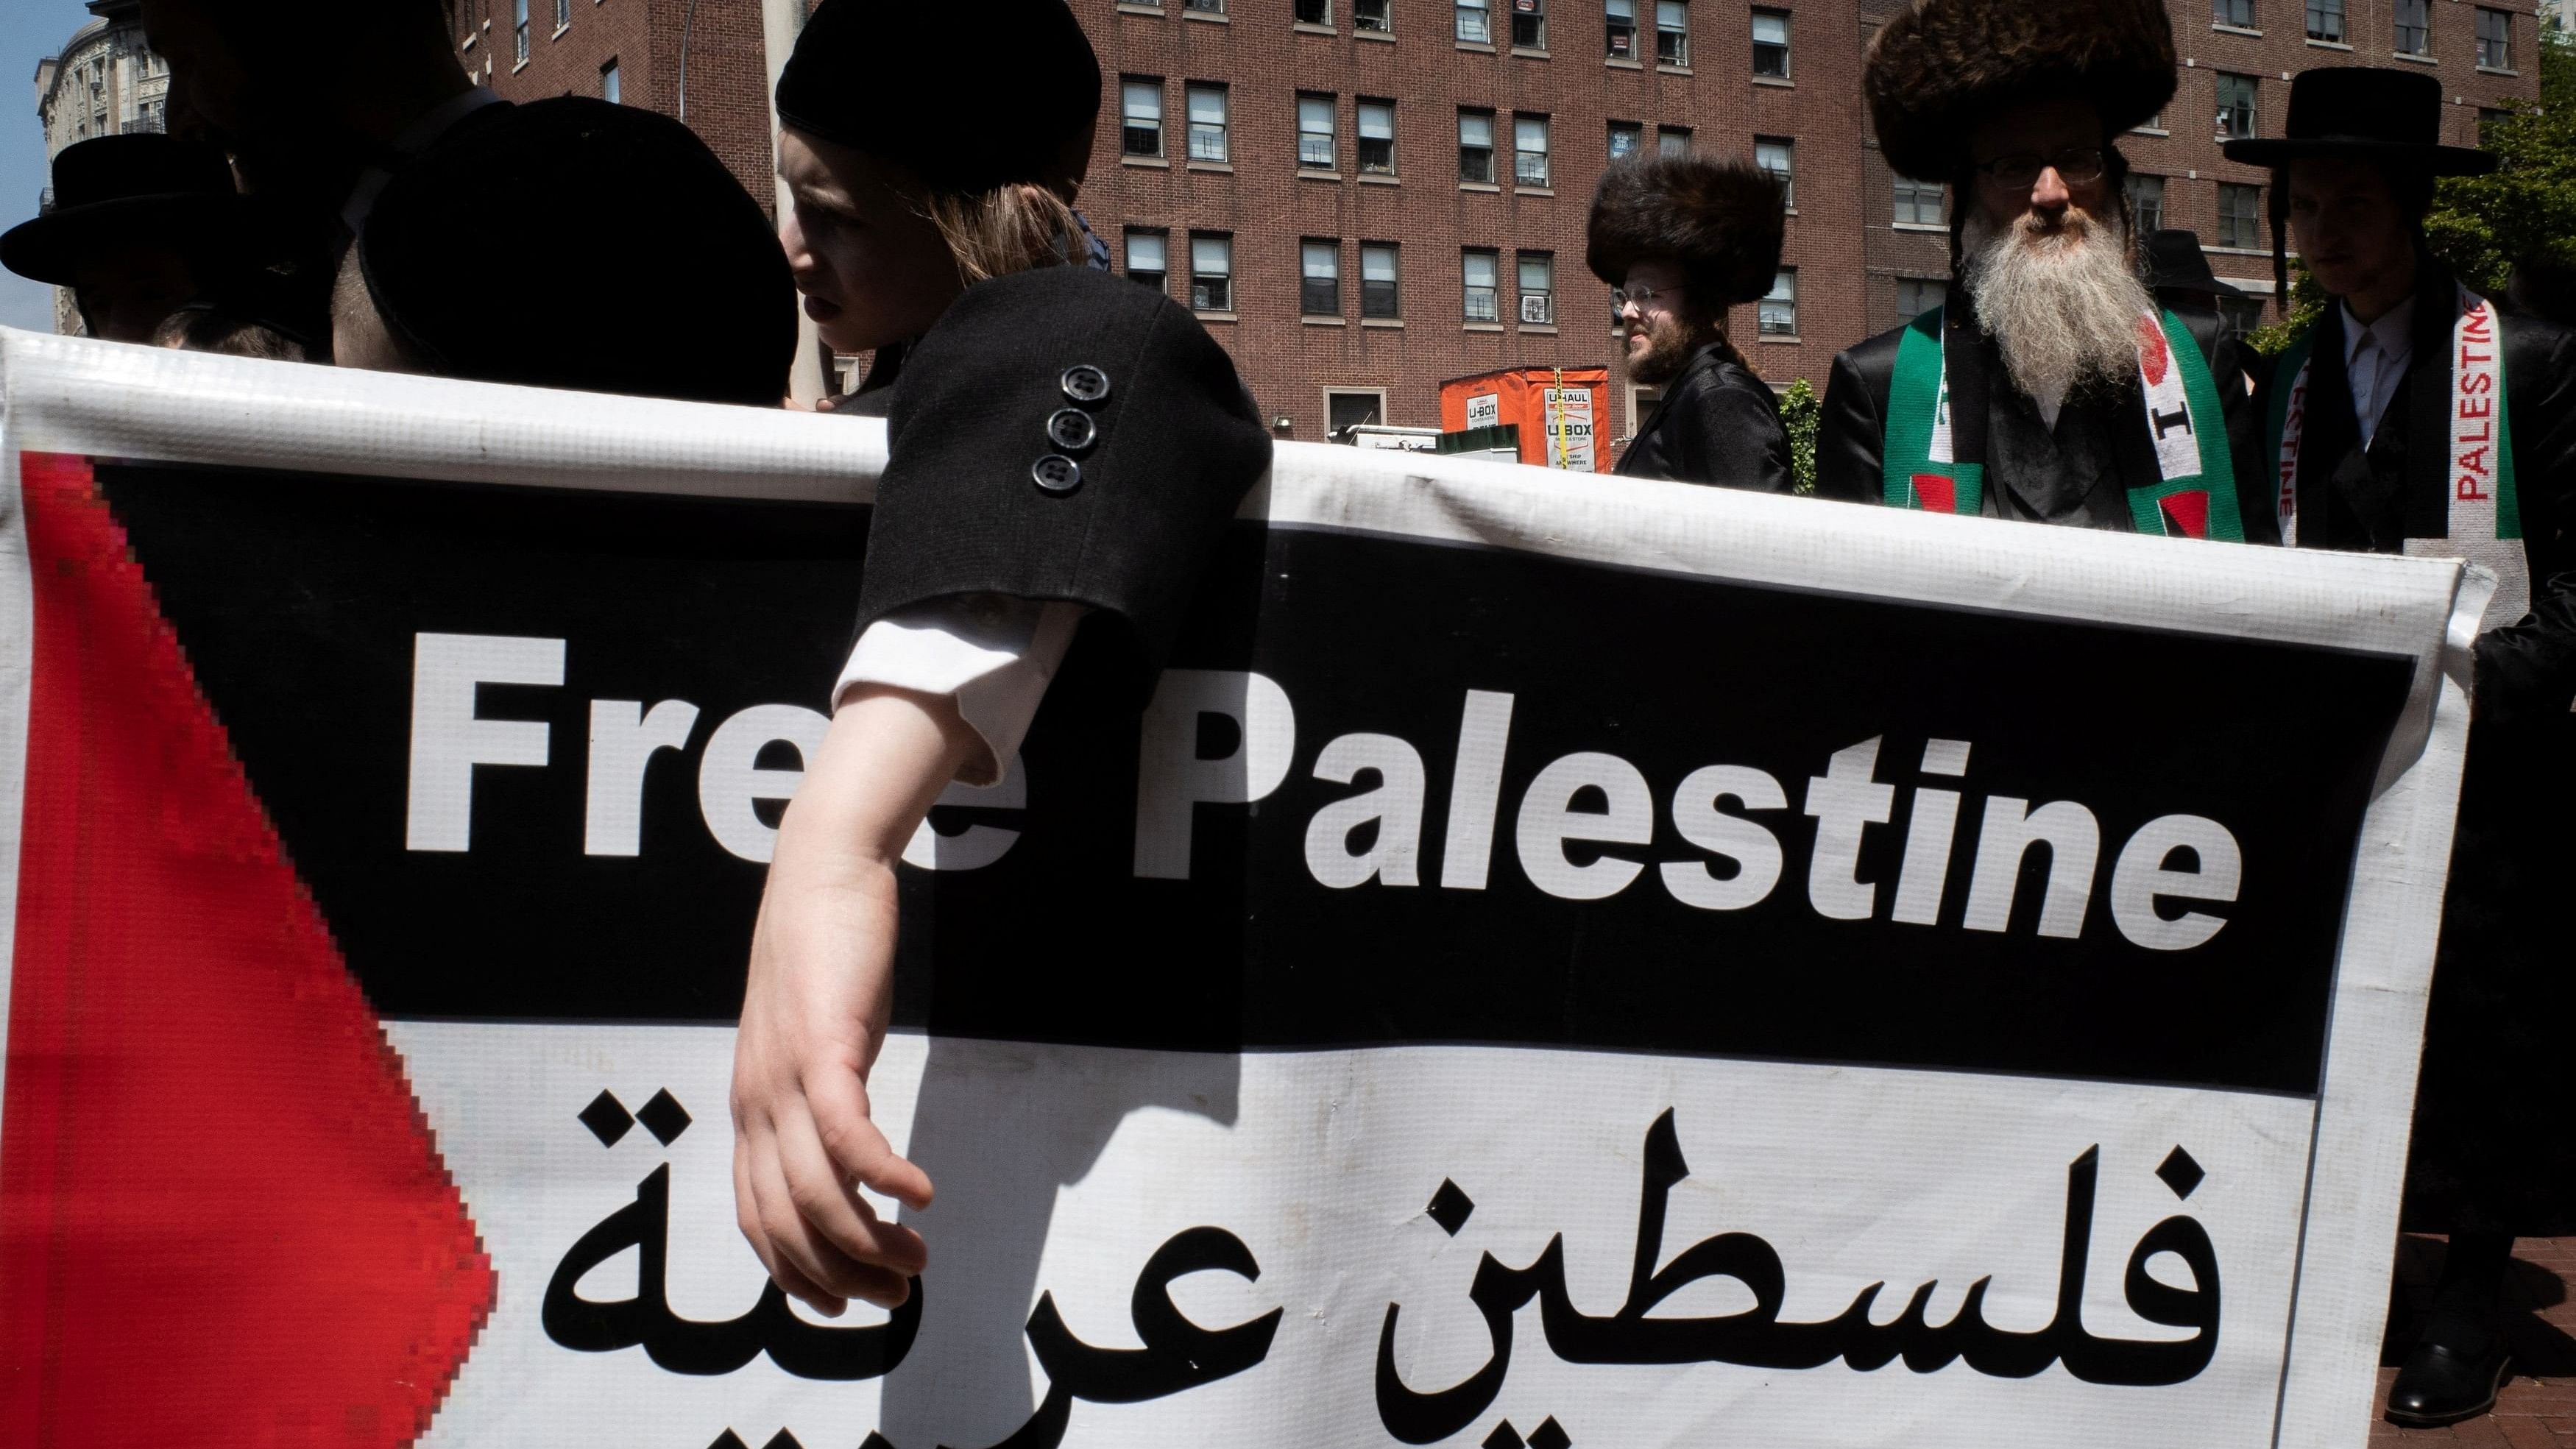 <div class="paragraphs"><p>Members of Orthodox Jewish community advocate for a free Palestine at the gates of Columbia University, during the ongoing conflict between Israel and the Palestinian Islamist group Hamas, in New York City, US.</p></div>